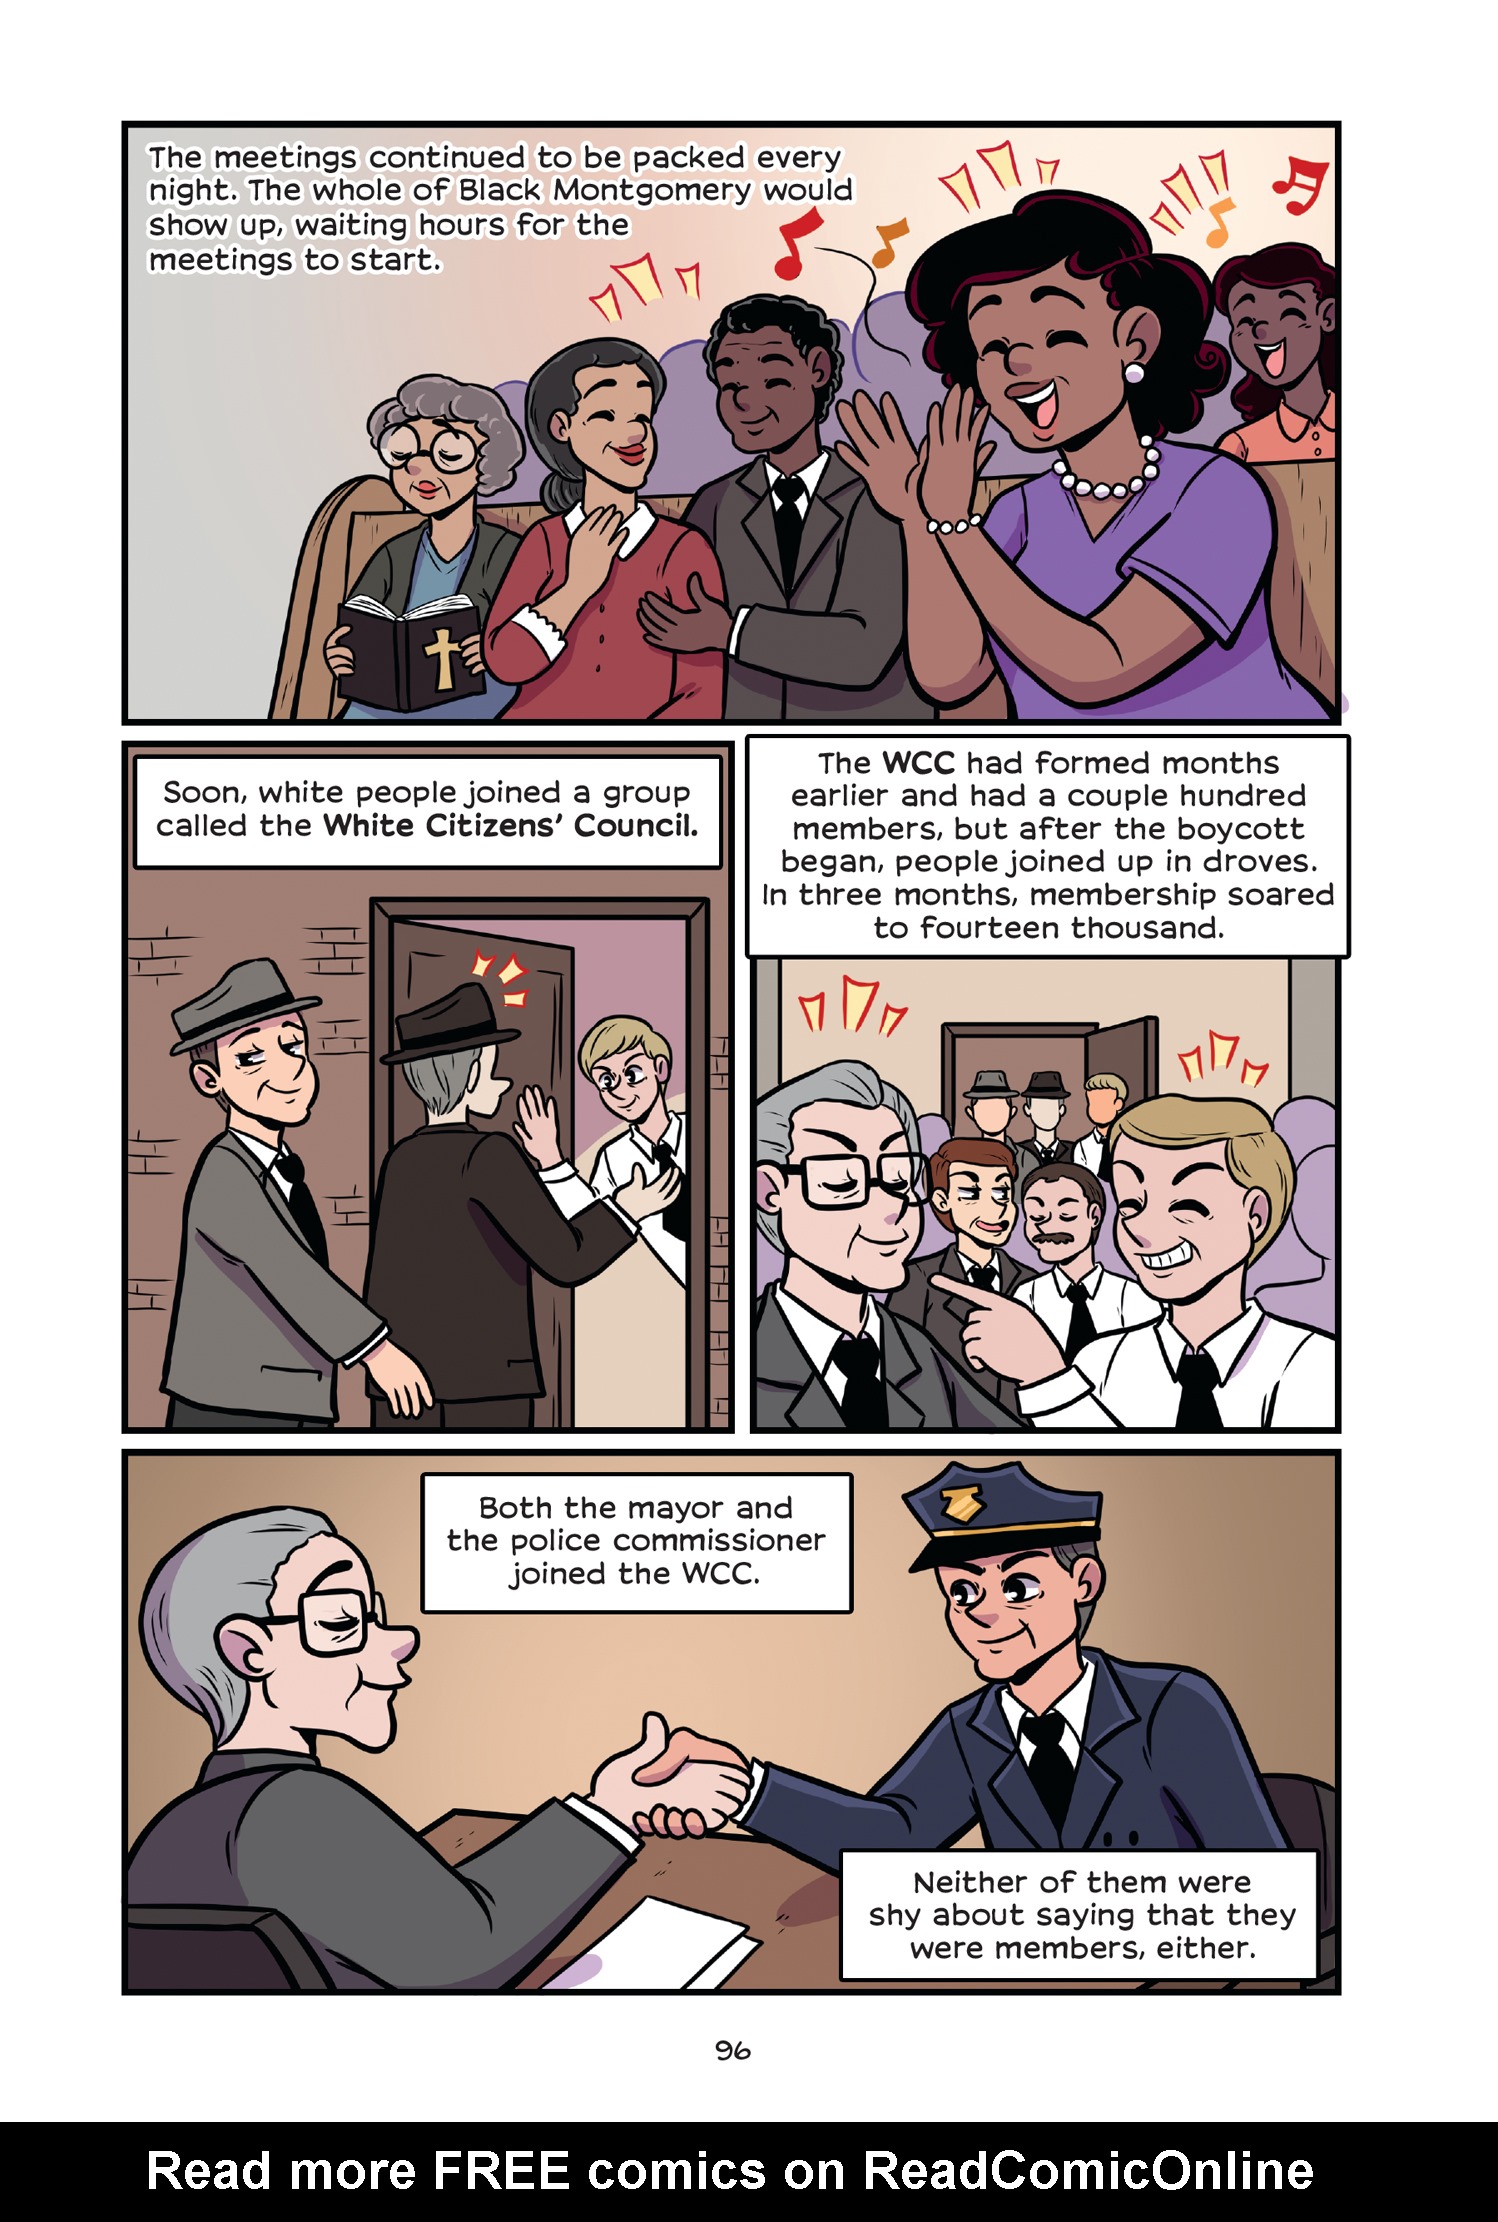 Read online History Comics comic -  Issue # Rosa Parks & Claudette Colvin - Civil Rights Heroes - 101